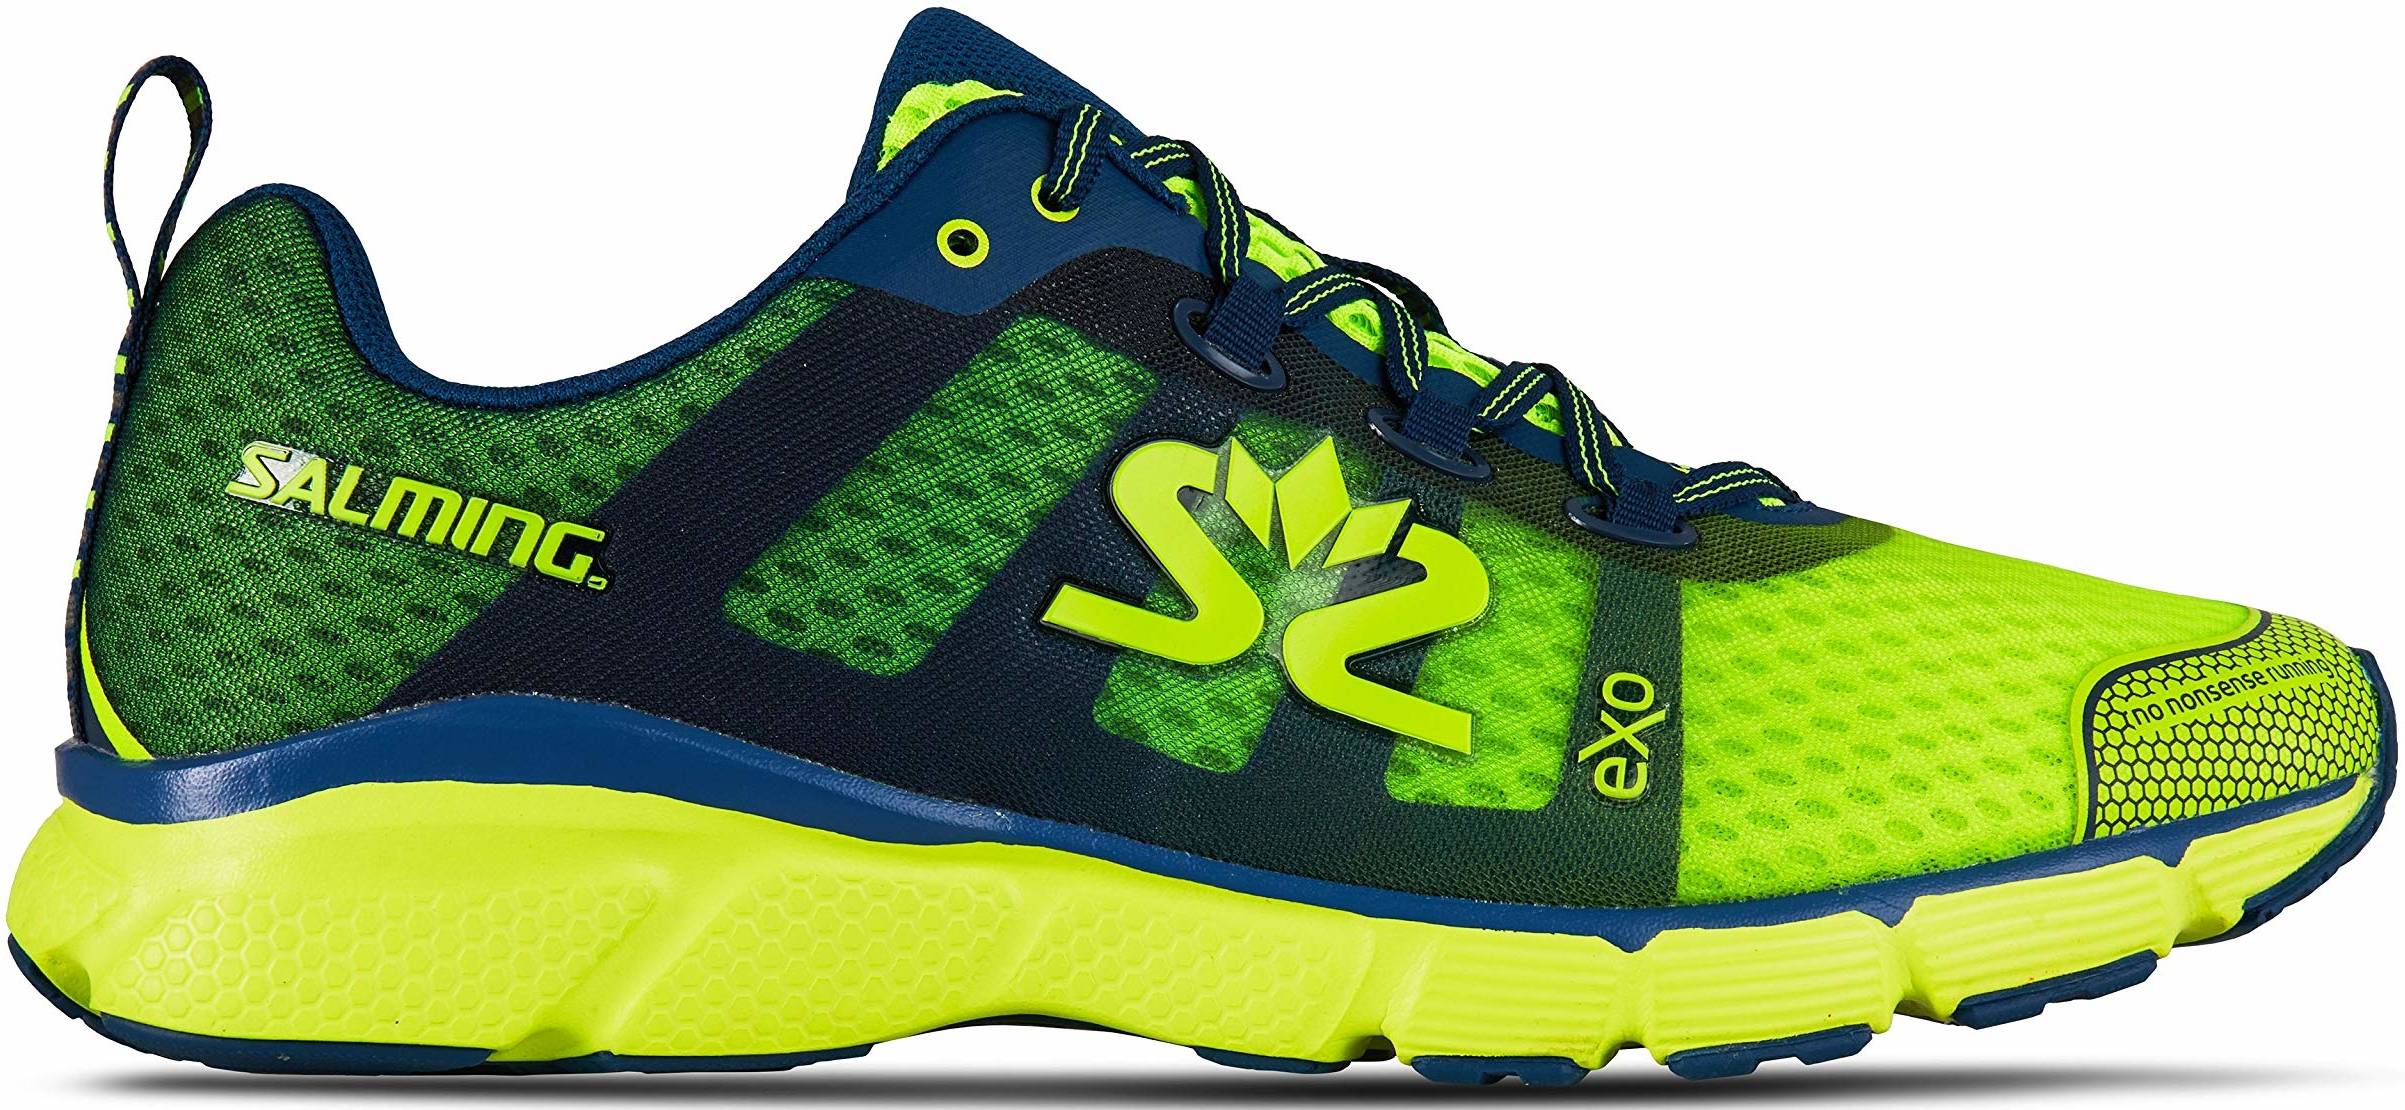 salming running shoes review